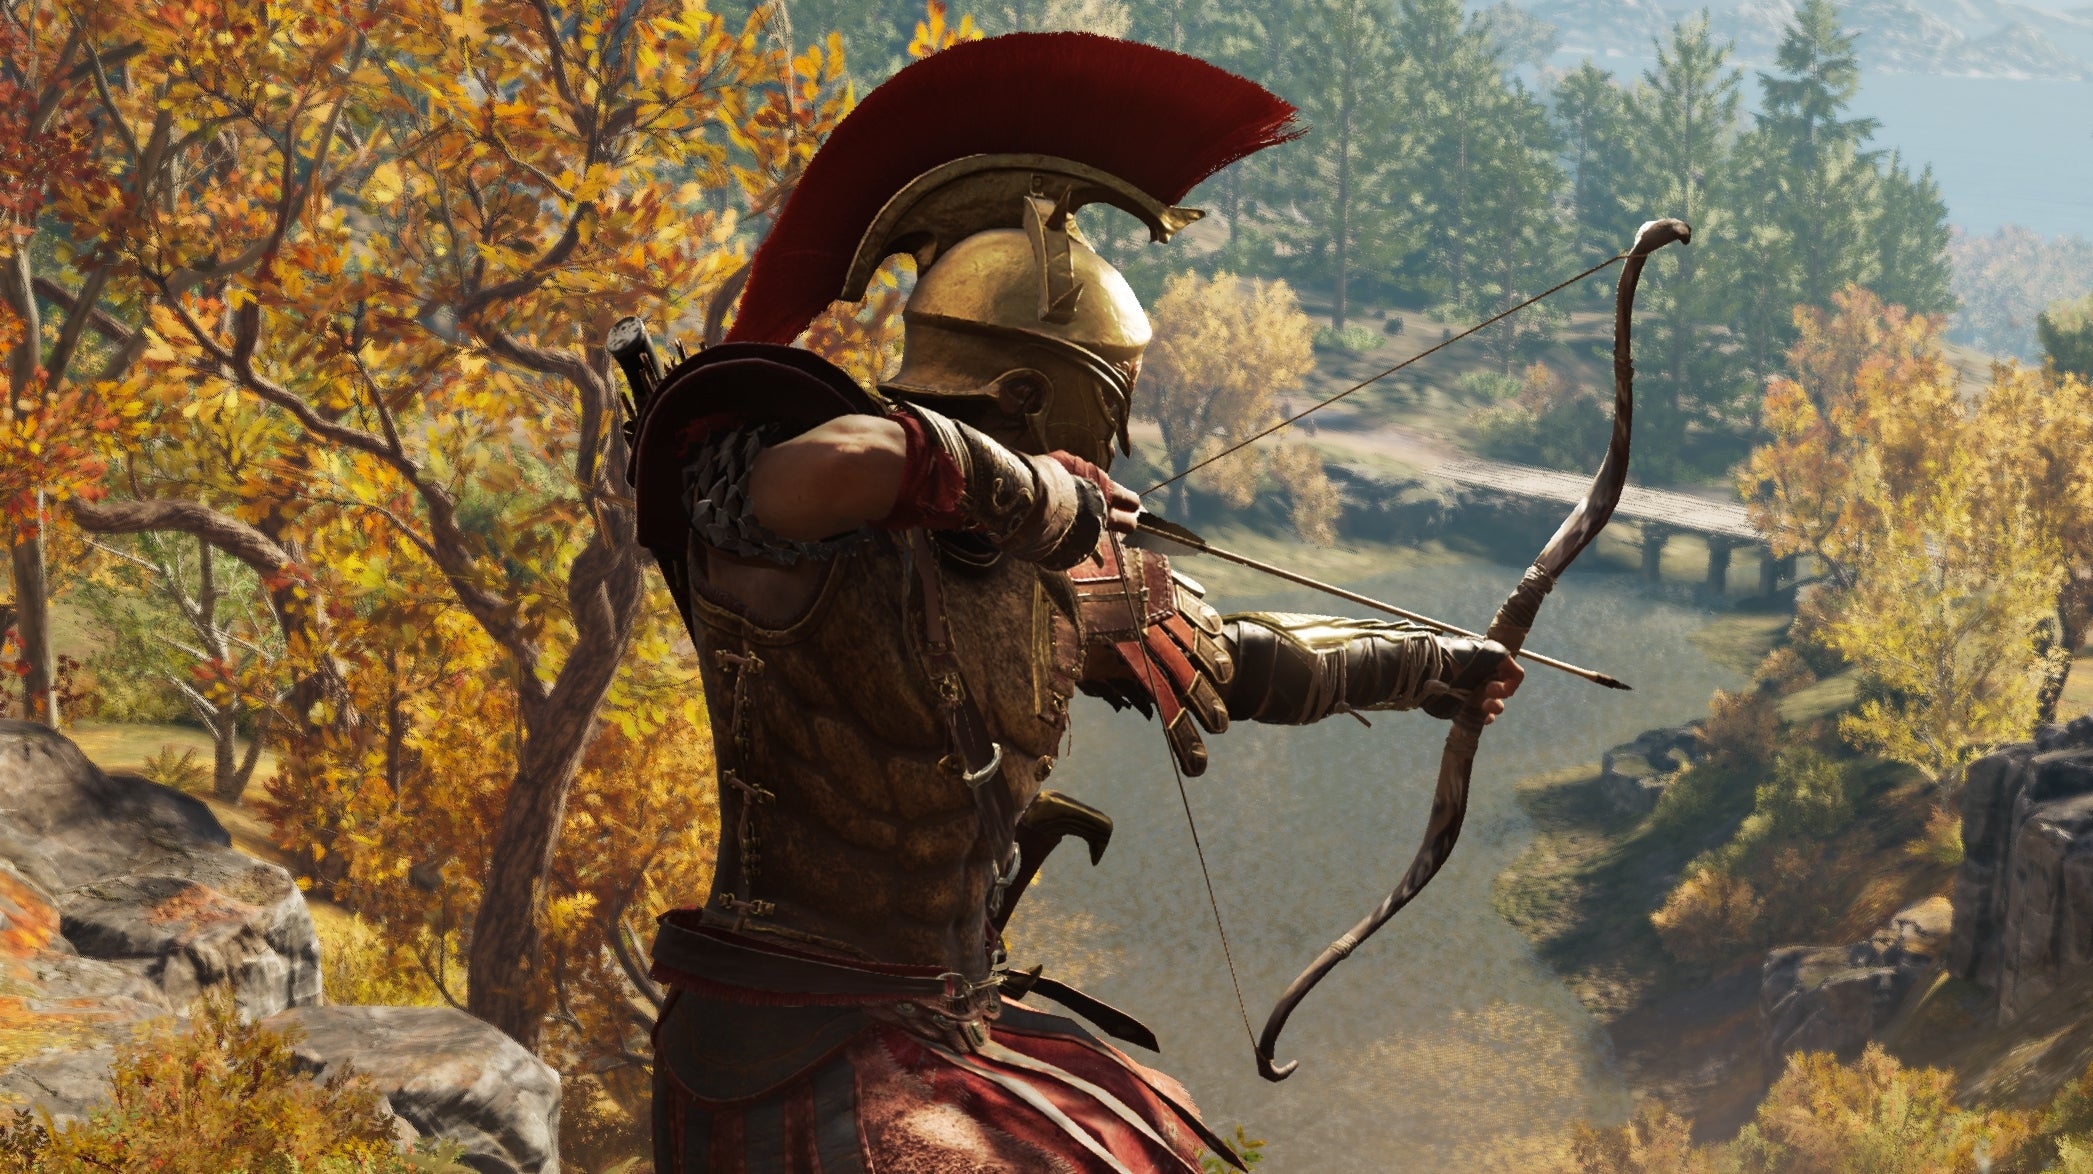 Image for Assassin's Creed Odyssey best weapons, armour, engravings, and legendary armour and weapons listed